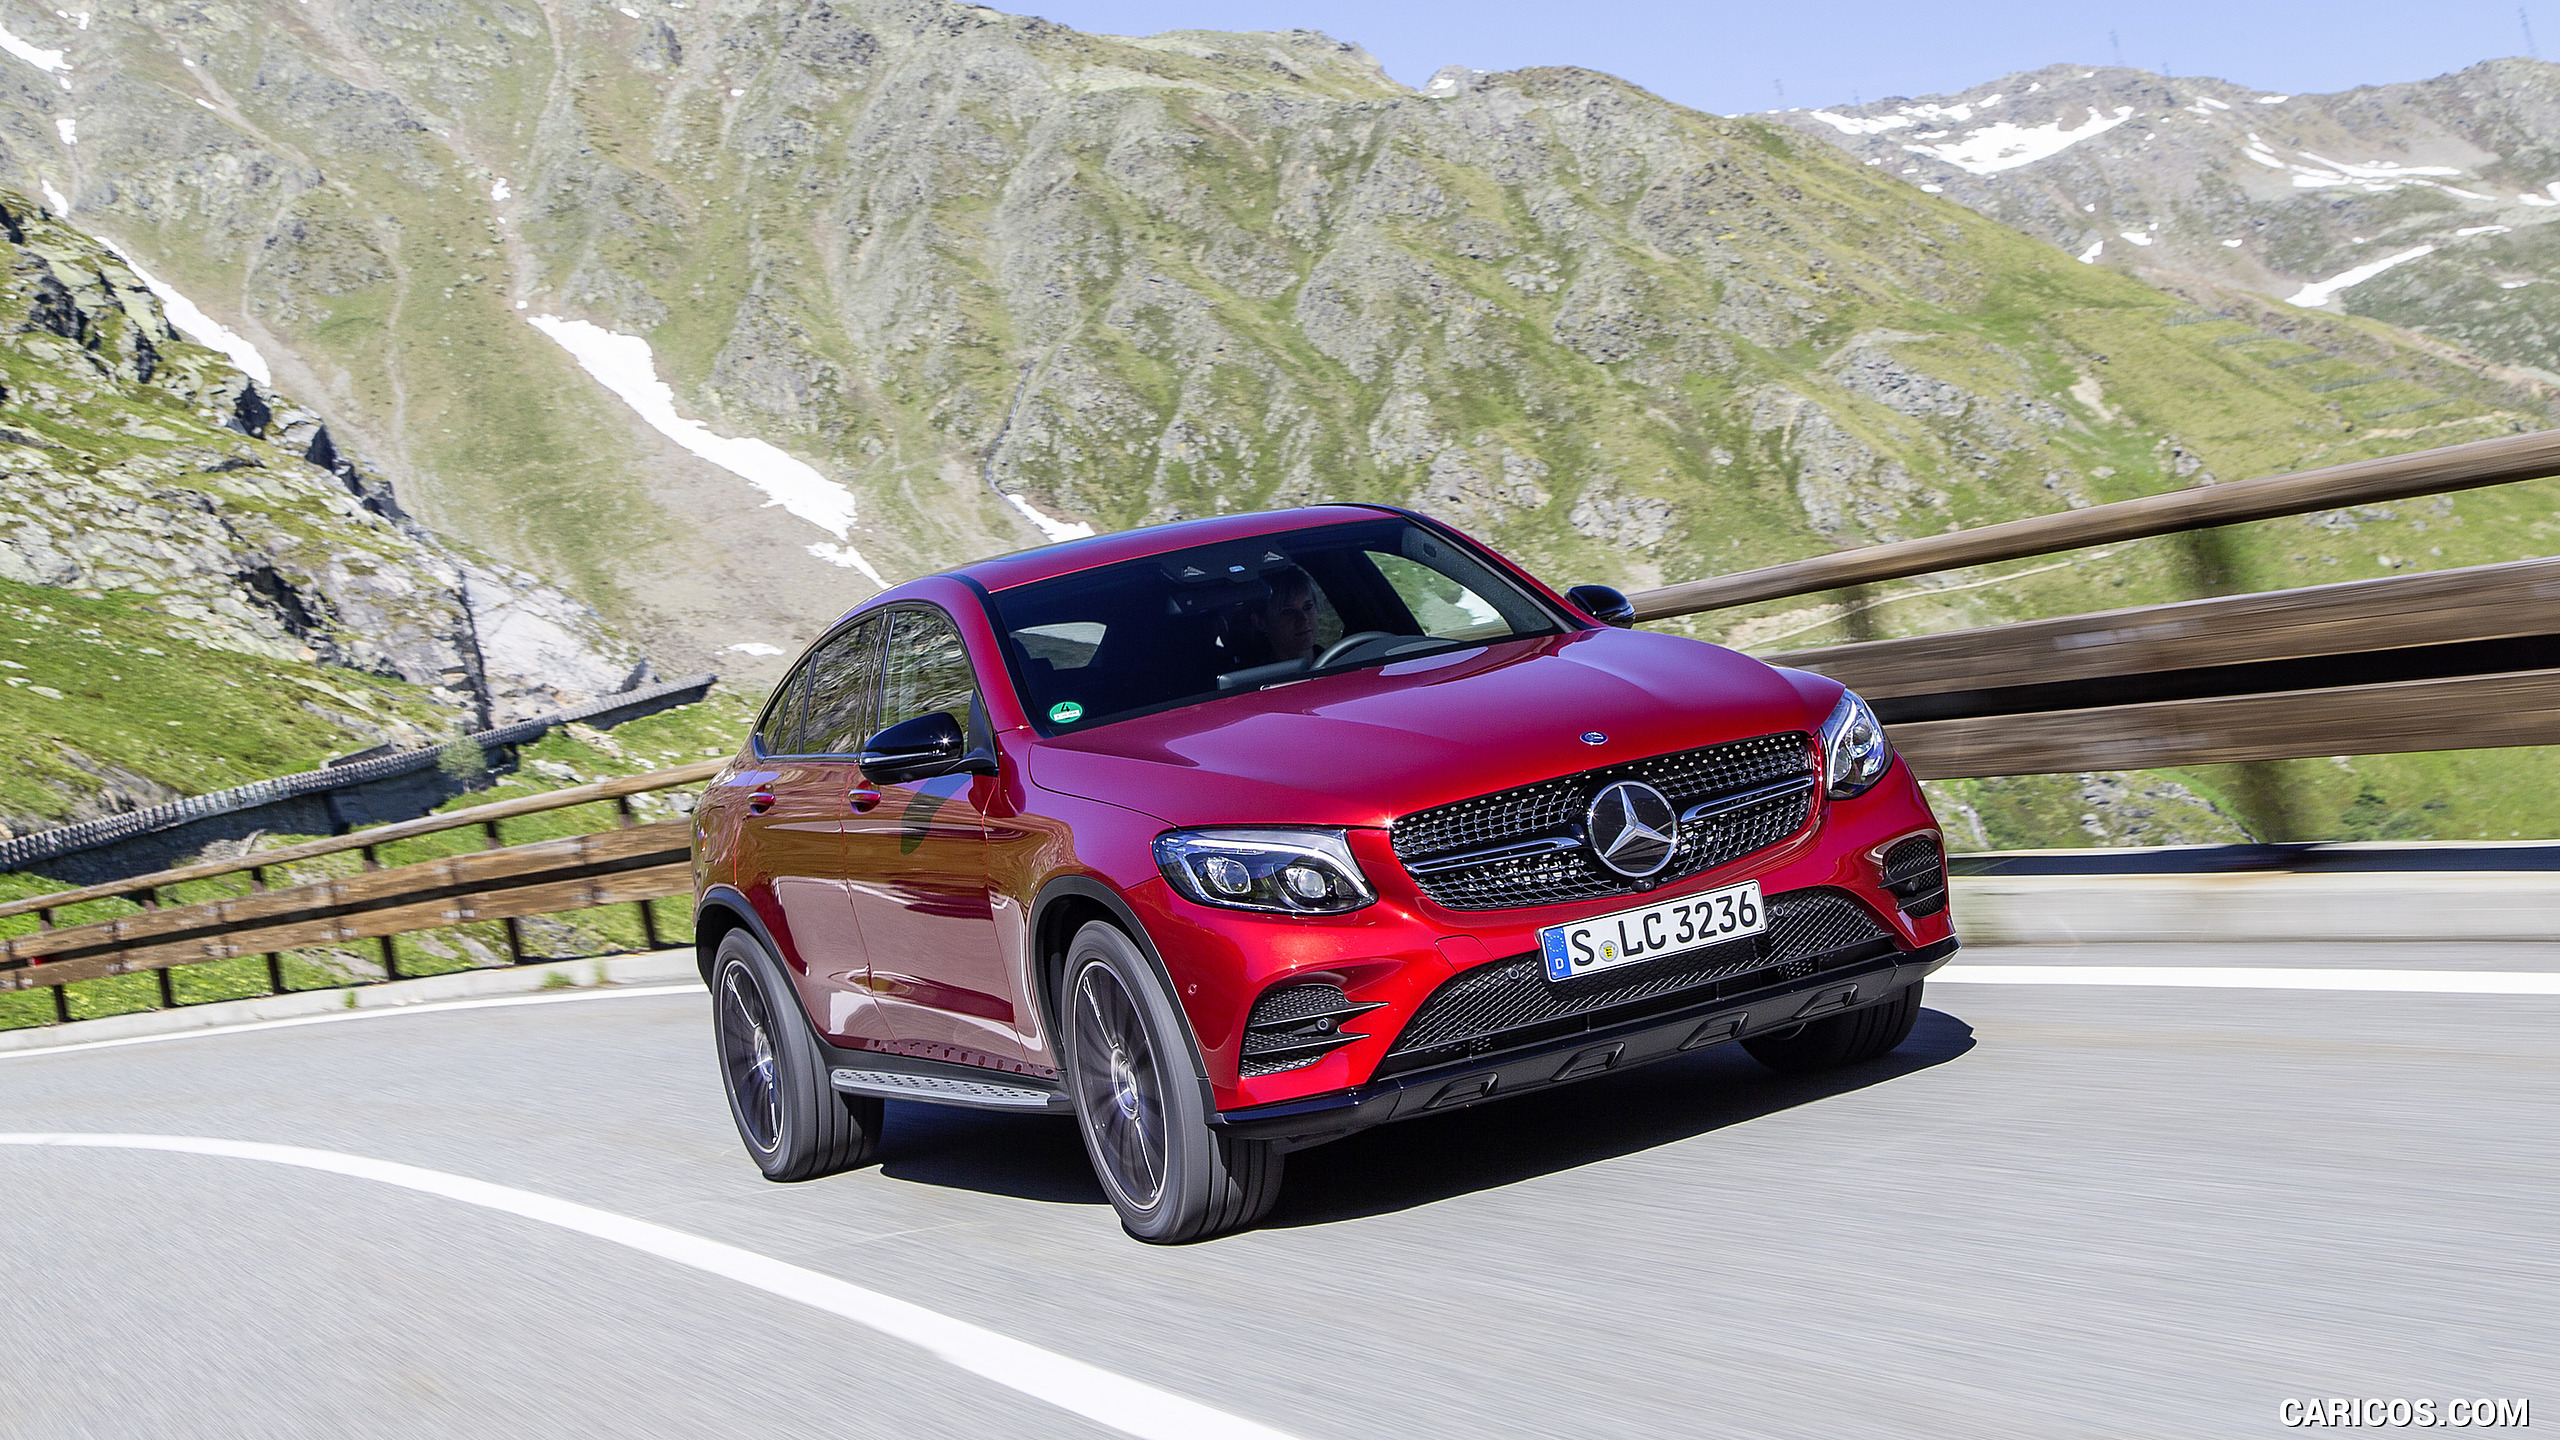 2017 Mercedes-Benz GLC 350 d Coupe (Diesel; Color: Hyacinth Red) - Front, #65 of 144